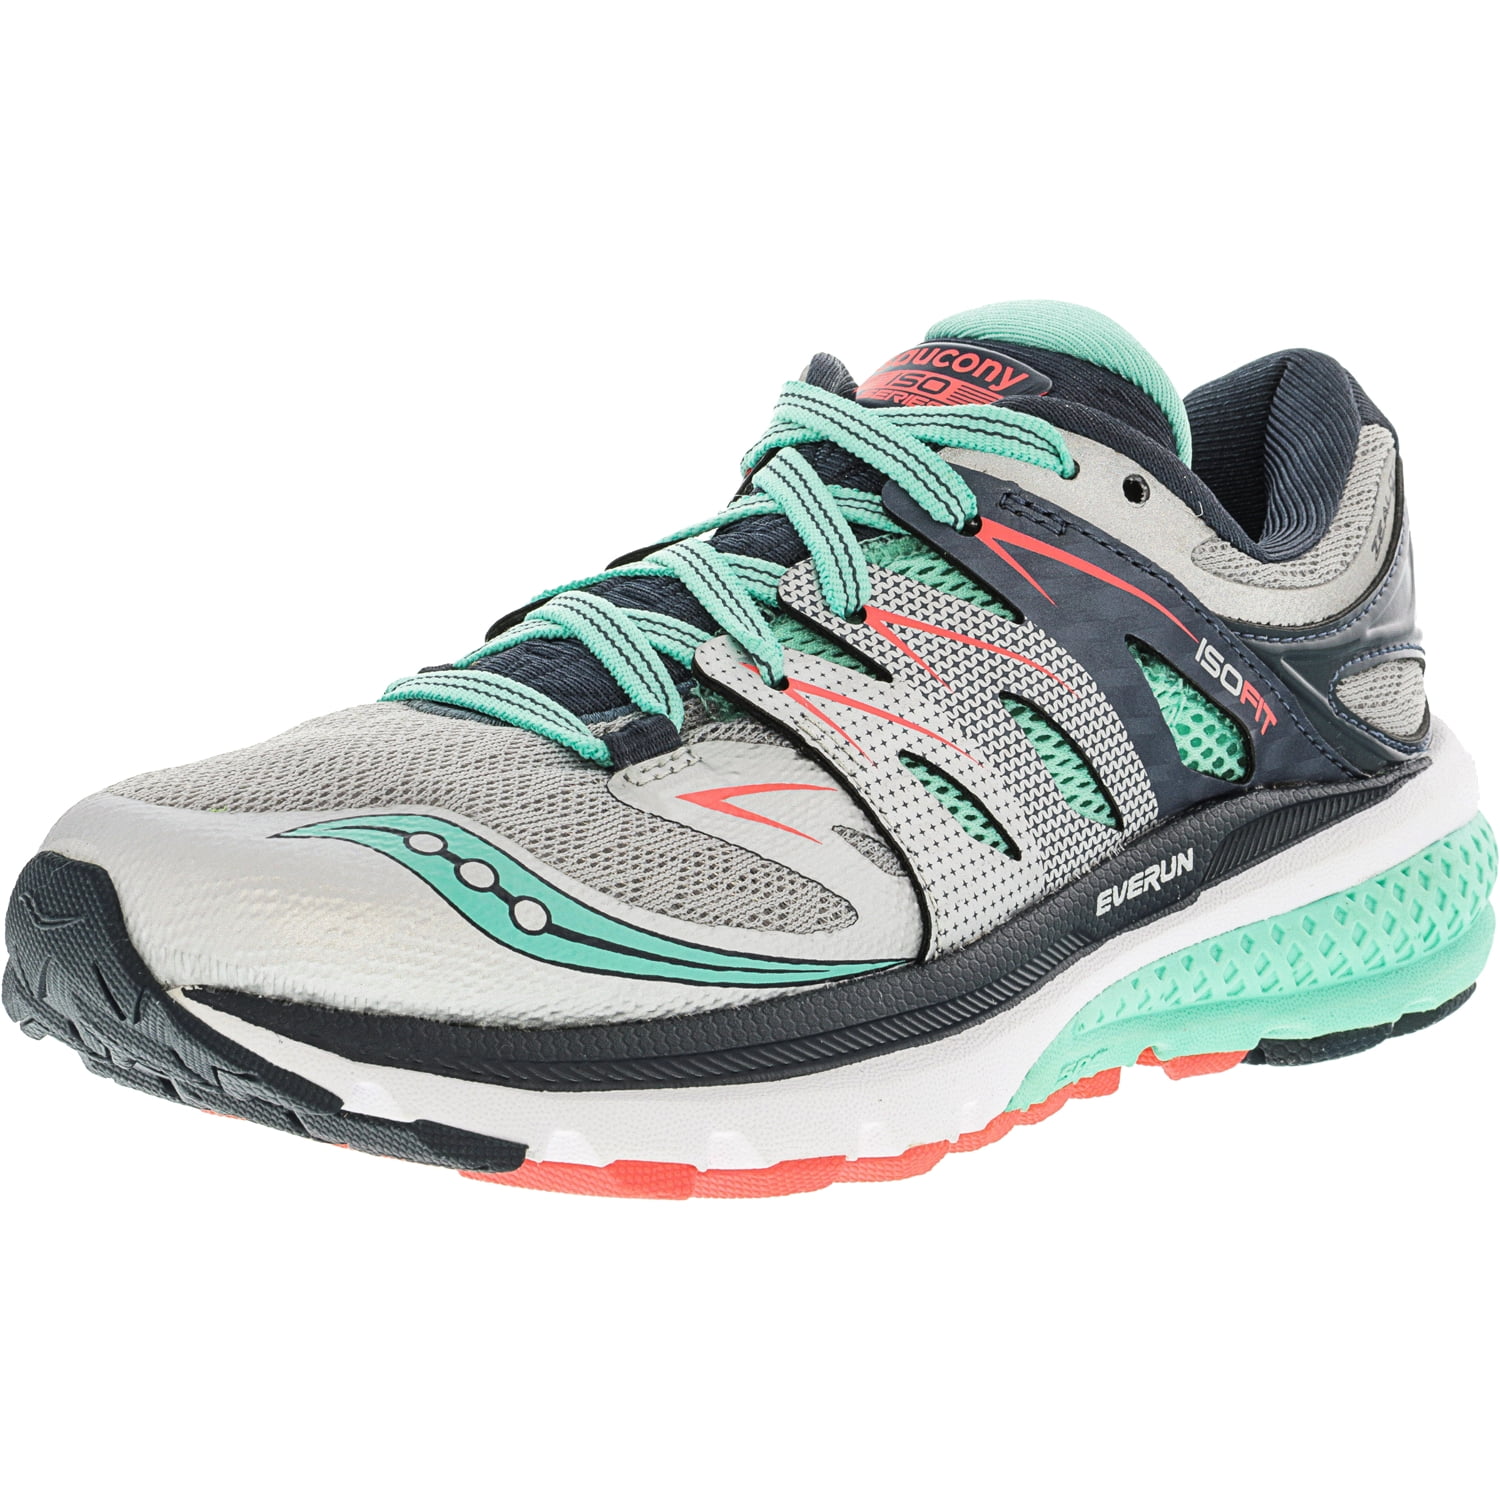 Saucony Women's Zealot Iso 2 Silver / Mint Coral Ankle-High Running ...